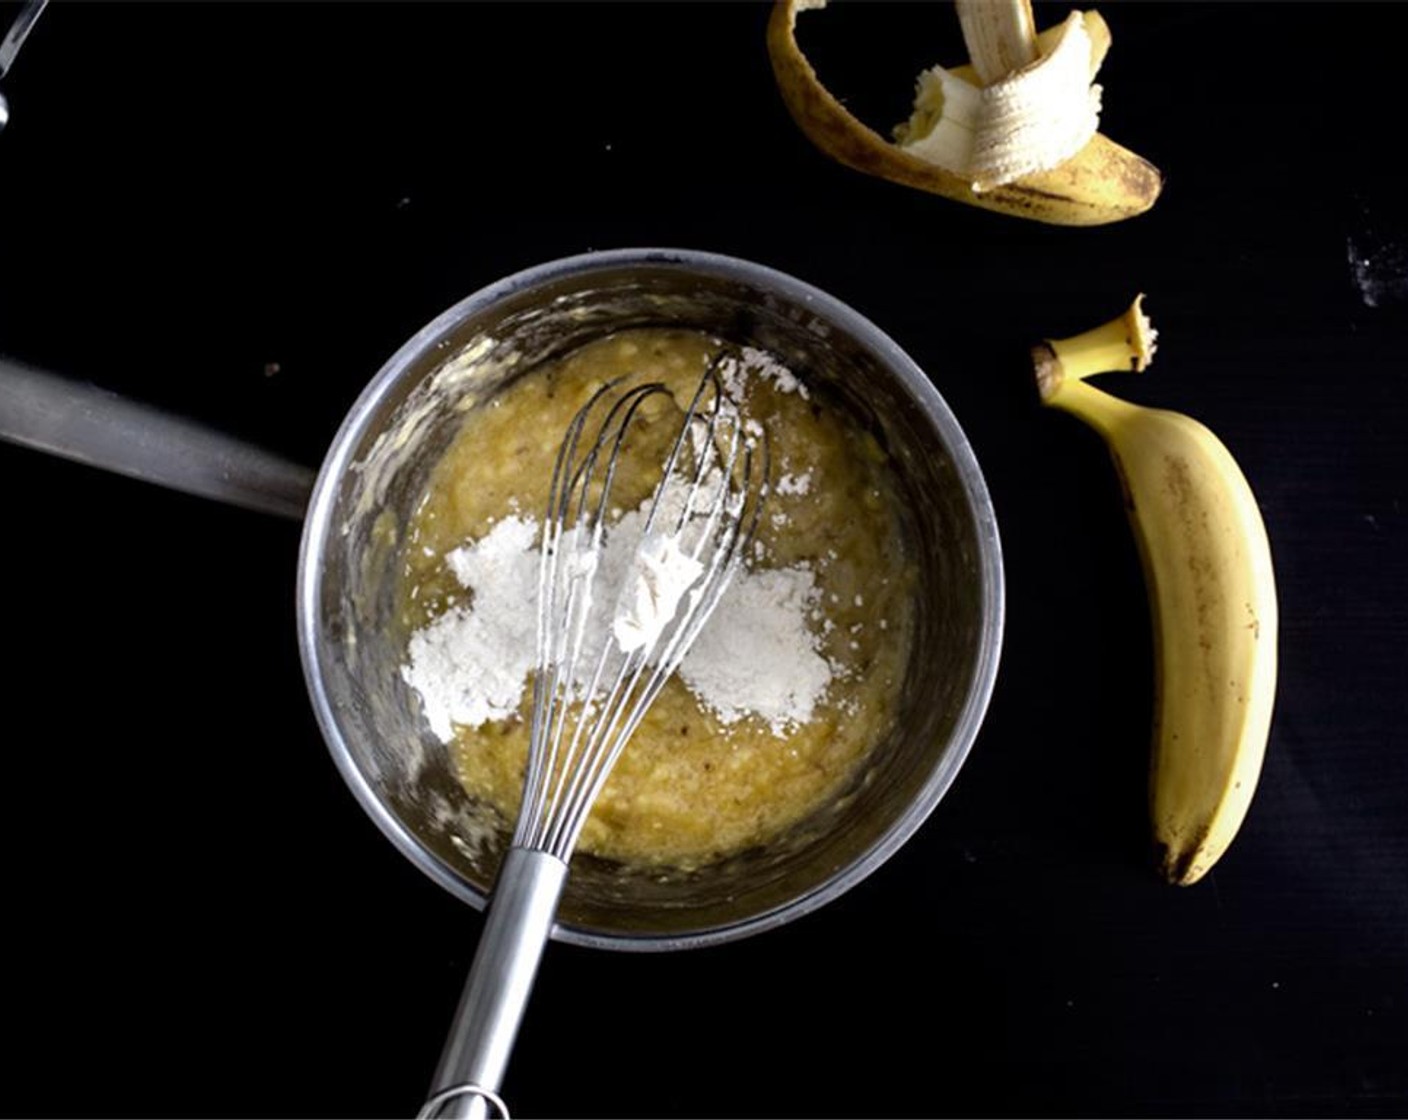 step 1 Combine the Bananas (2) and Brown Sugar (2 Tbsp) in a pot, then mash/liquify the bananas as much as you can with a whisk. Add Bread Flour (3 Tbsp) and mix well.